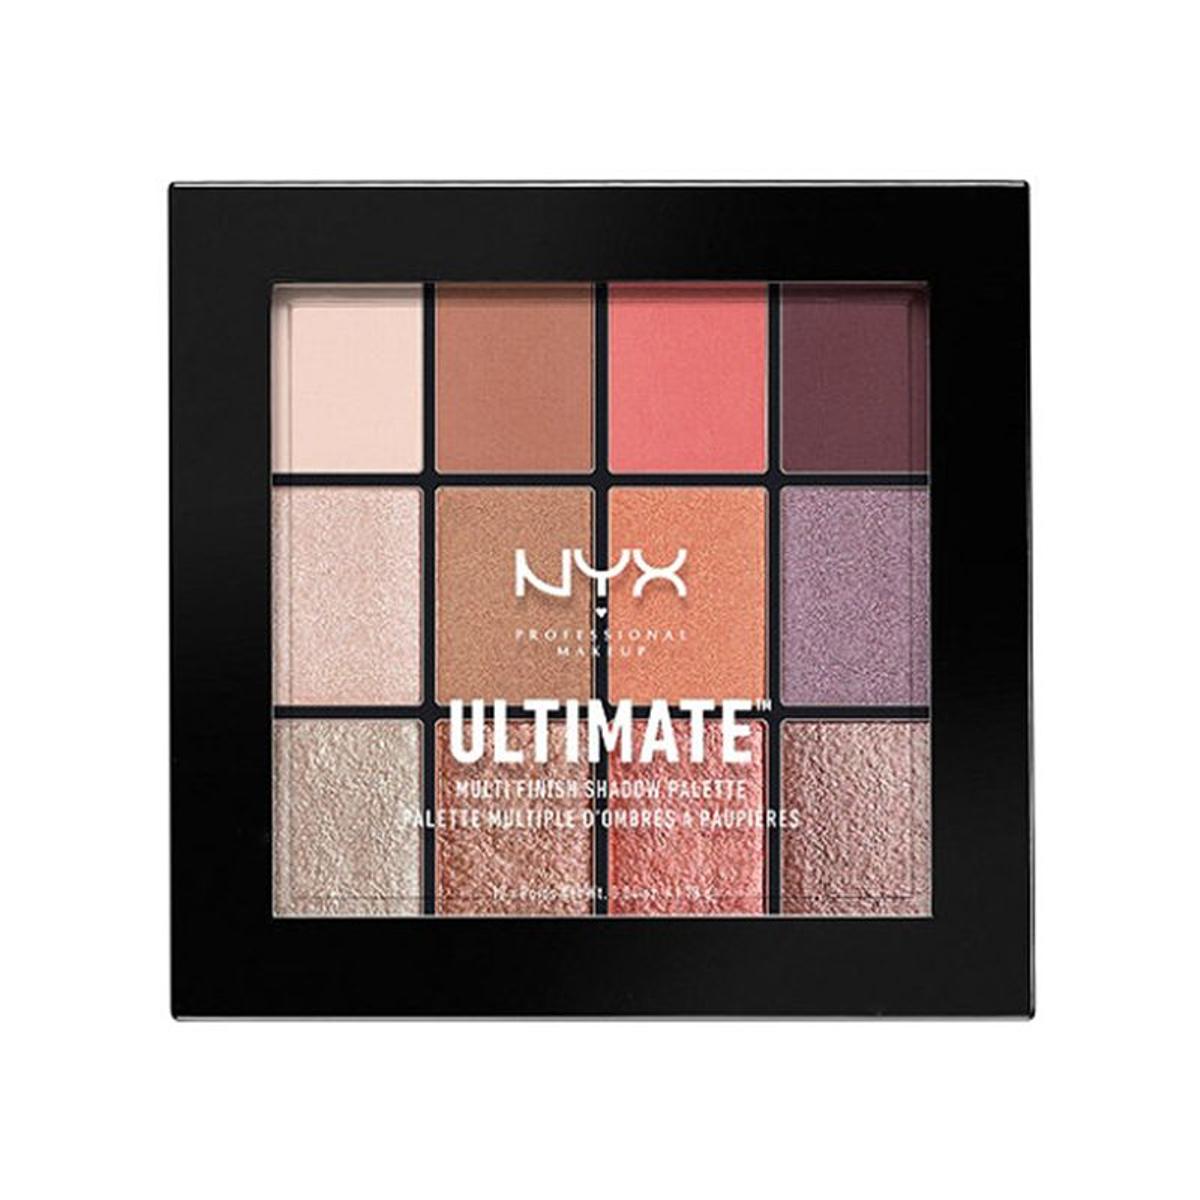 Ultimate Multi-Finish Shadow Palette, NYX